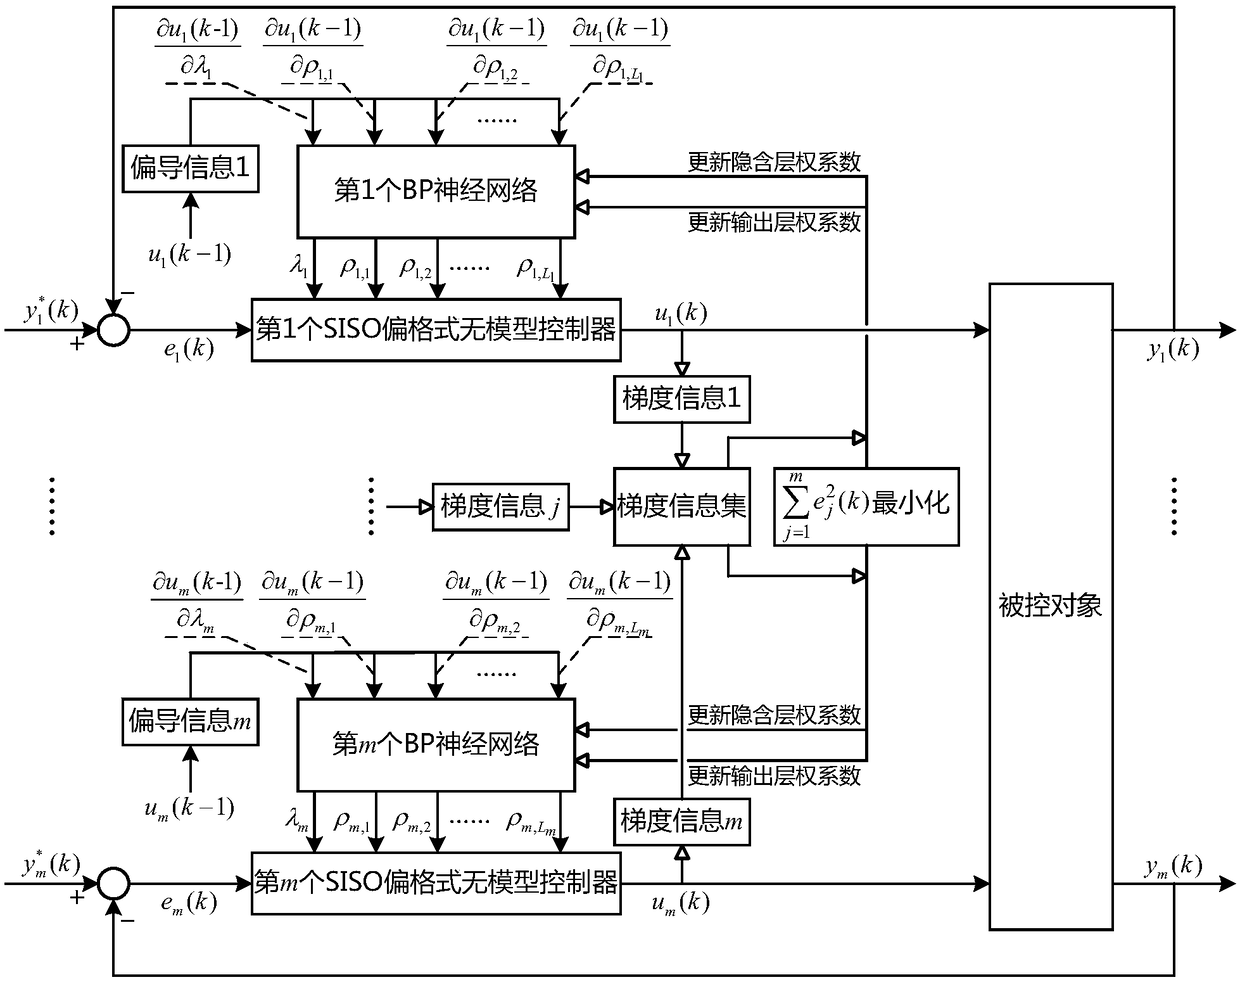 MIMO (Multiple Input and Multiple Output) decoupling control method based on SISO (Single Input and Single Output) partial format model-free controller and partial derivative information